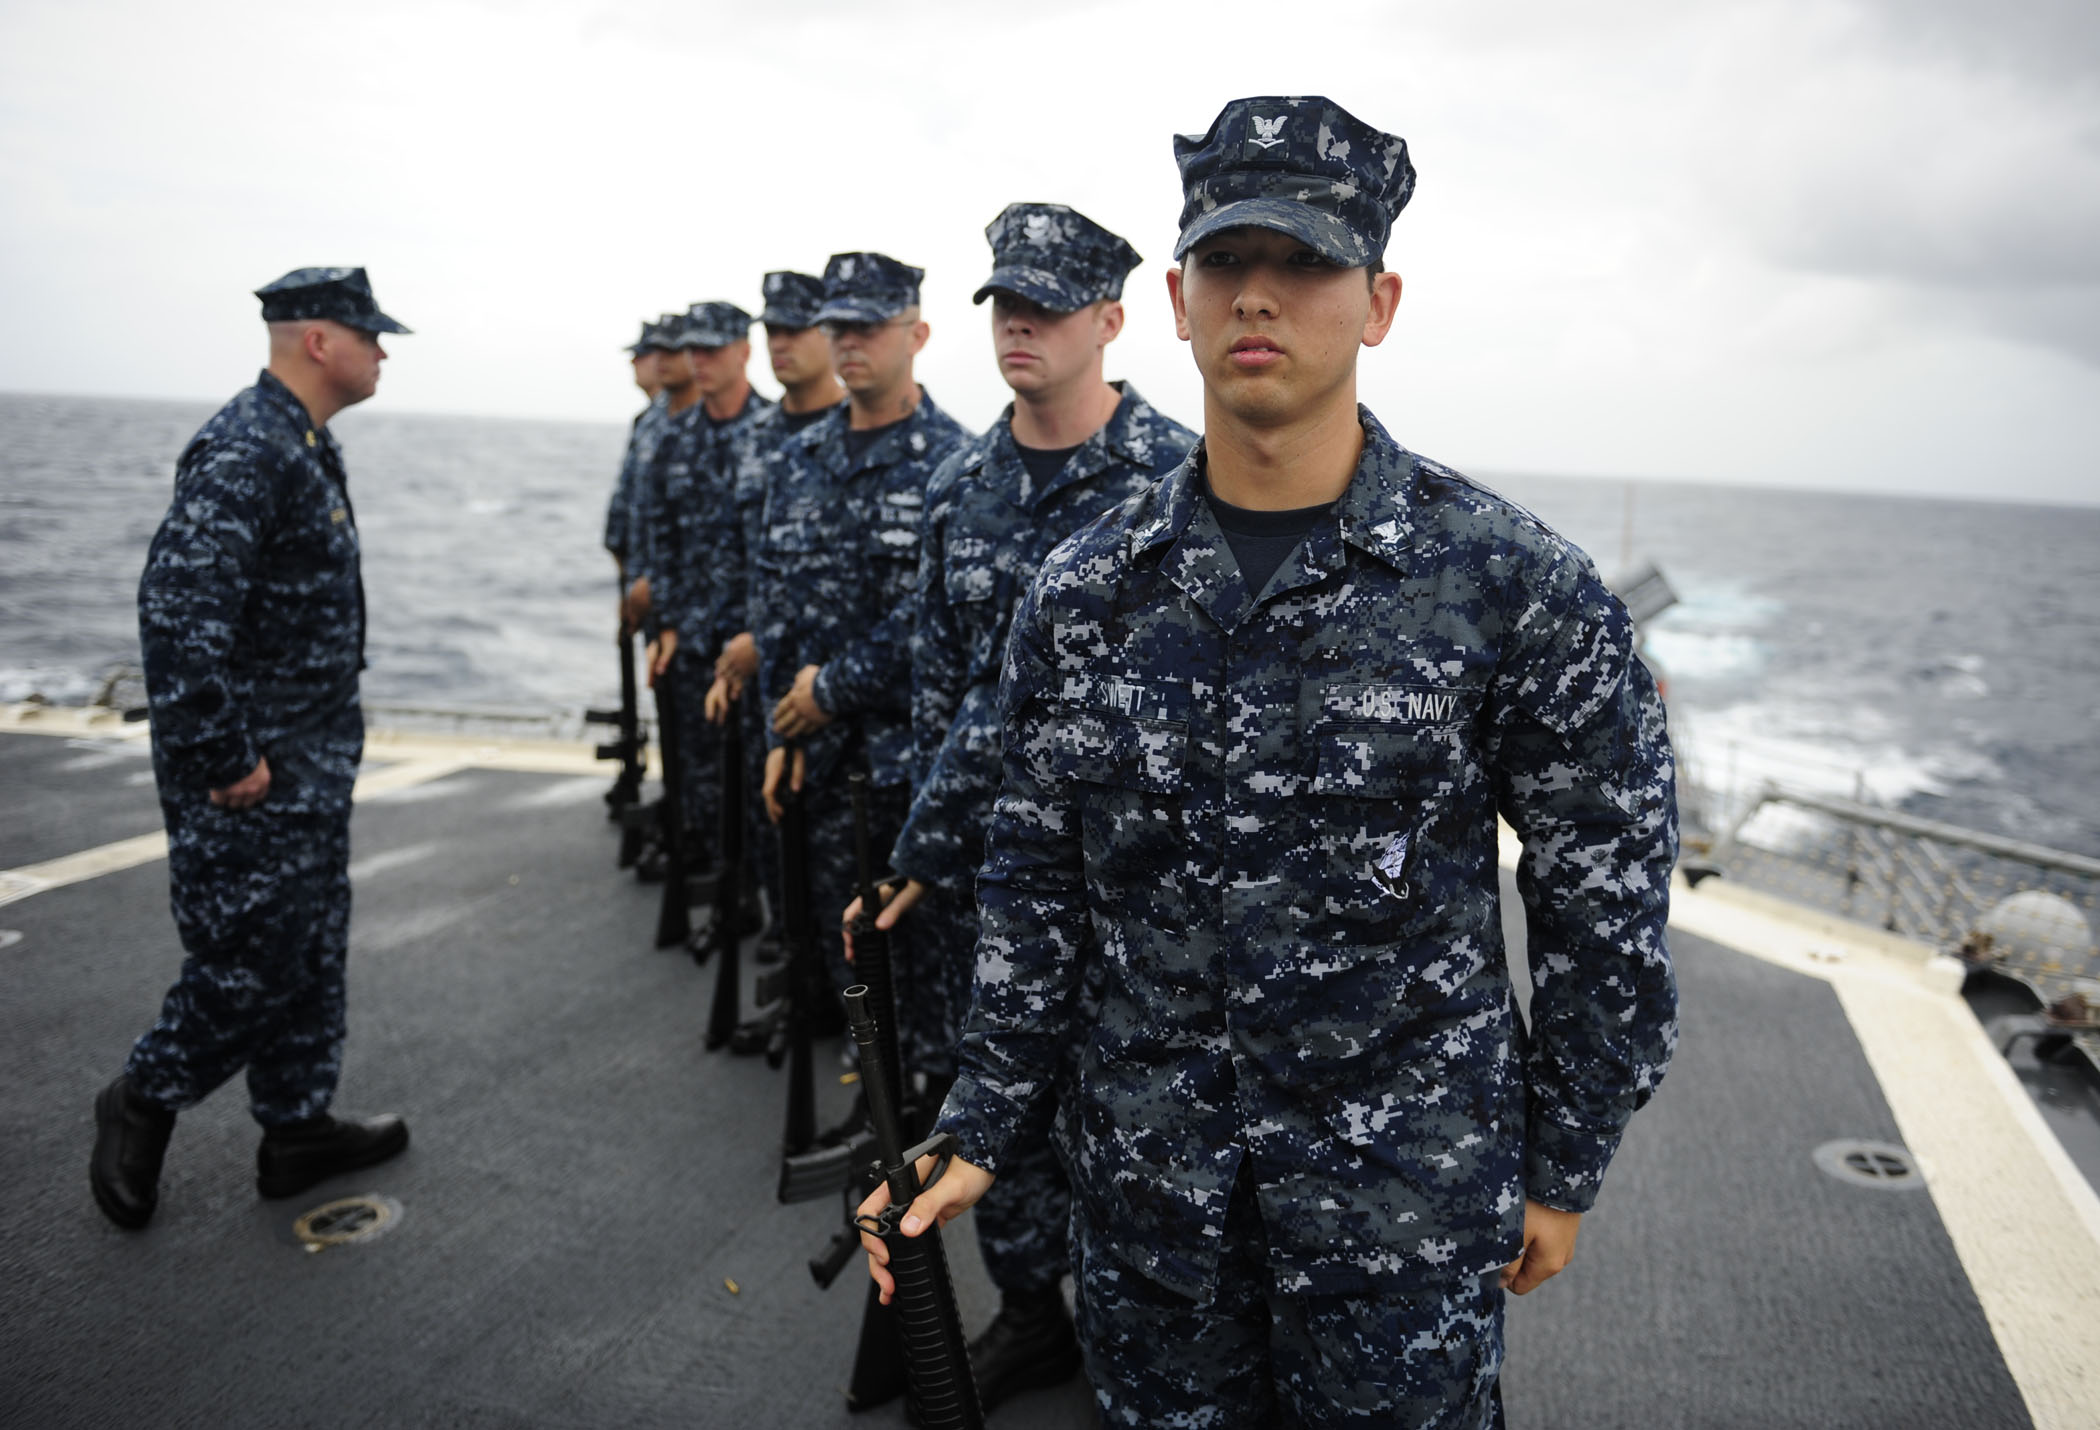 FileUS Navy 110911 N ZZ999 689 Sailors stand in formation during